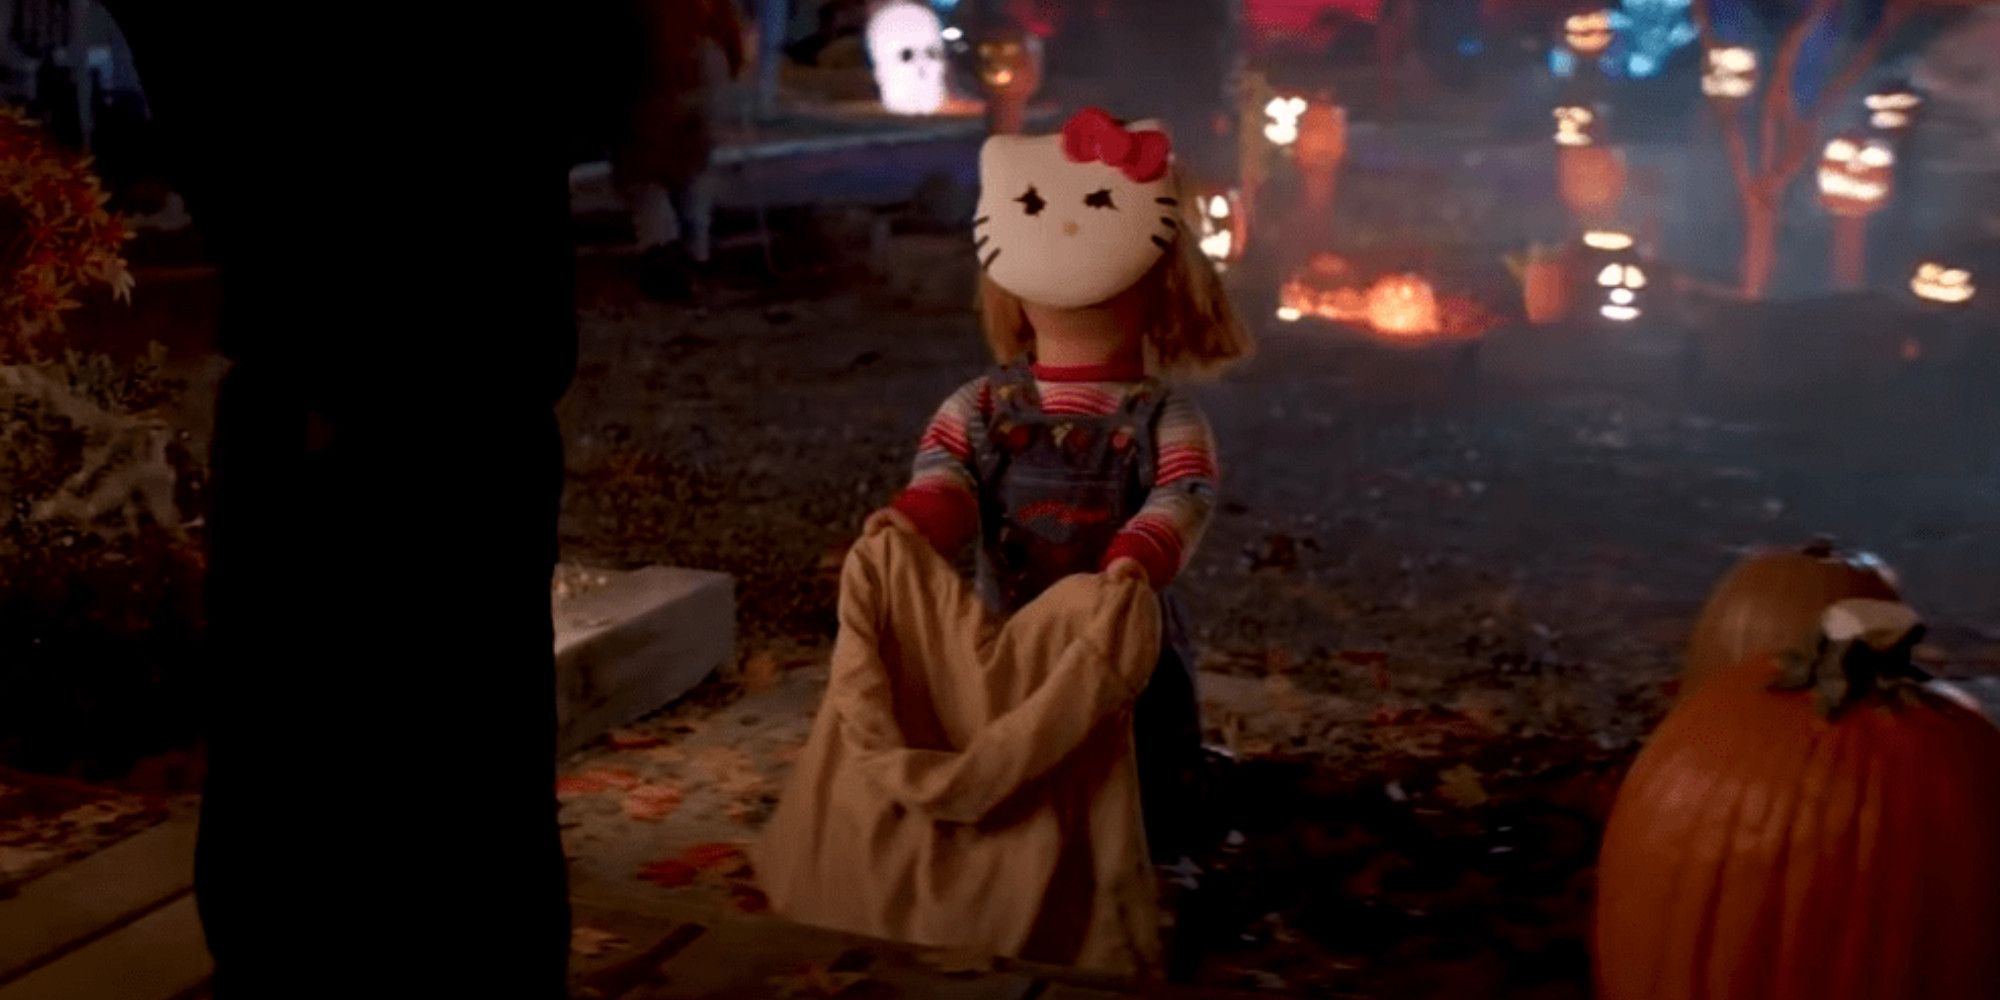 Brad Dourif as Charles Lee Ray with Hello Kitty mask in Chucky TV Show